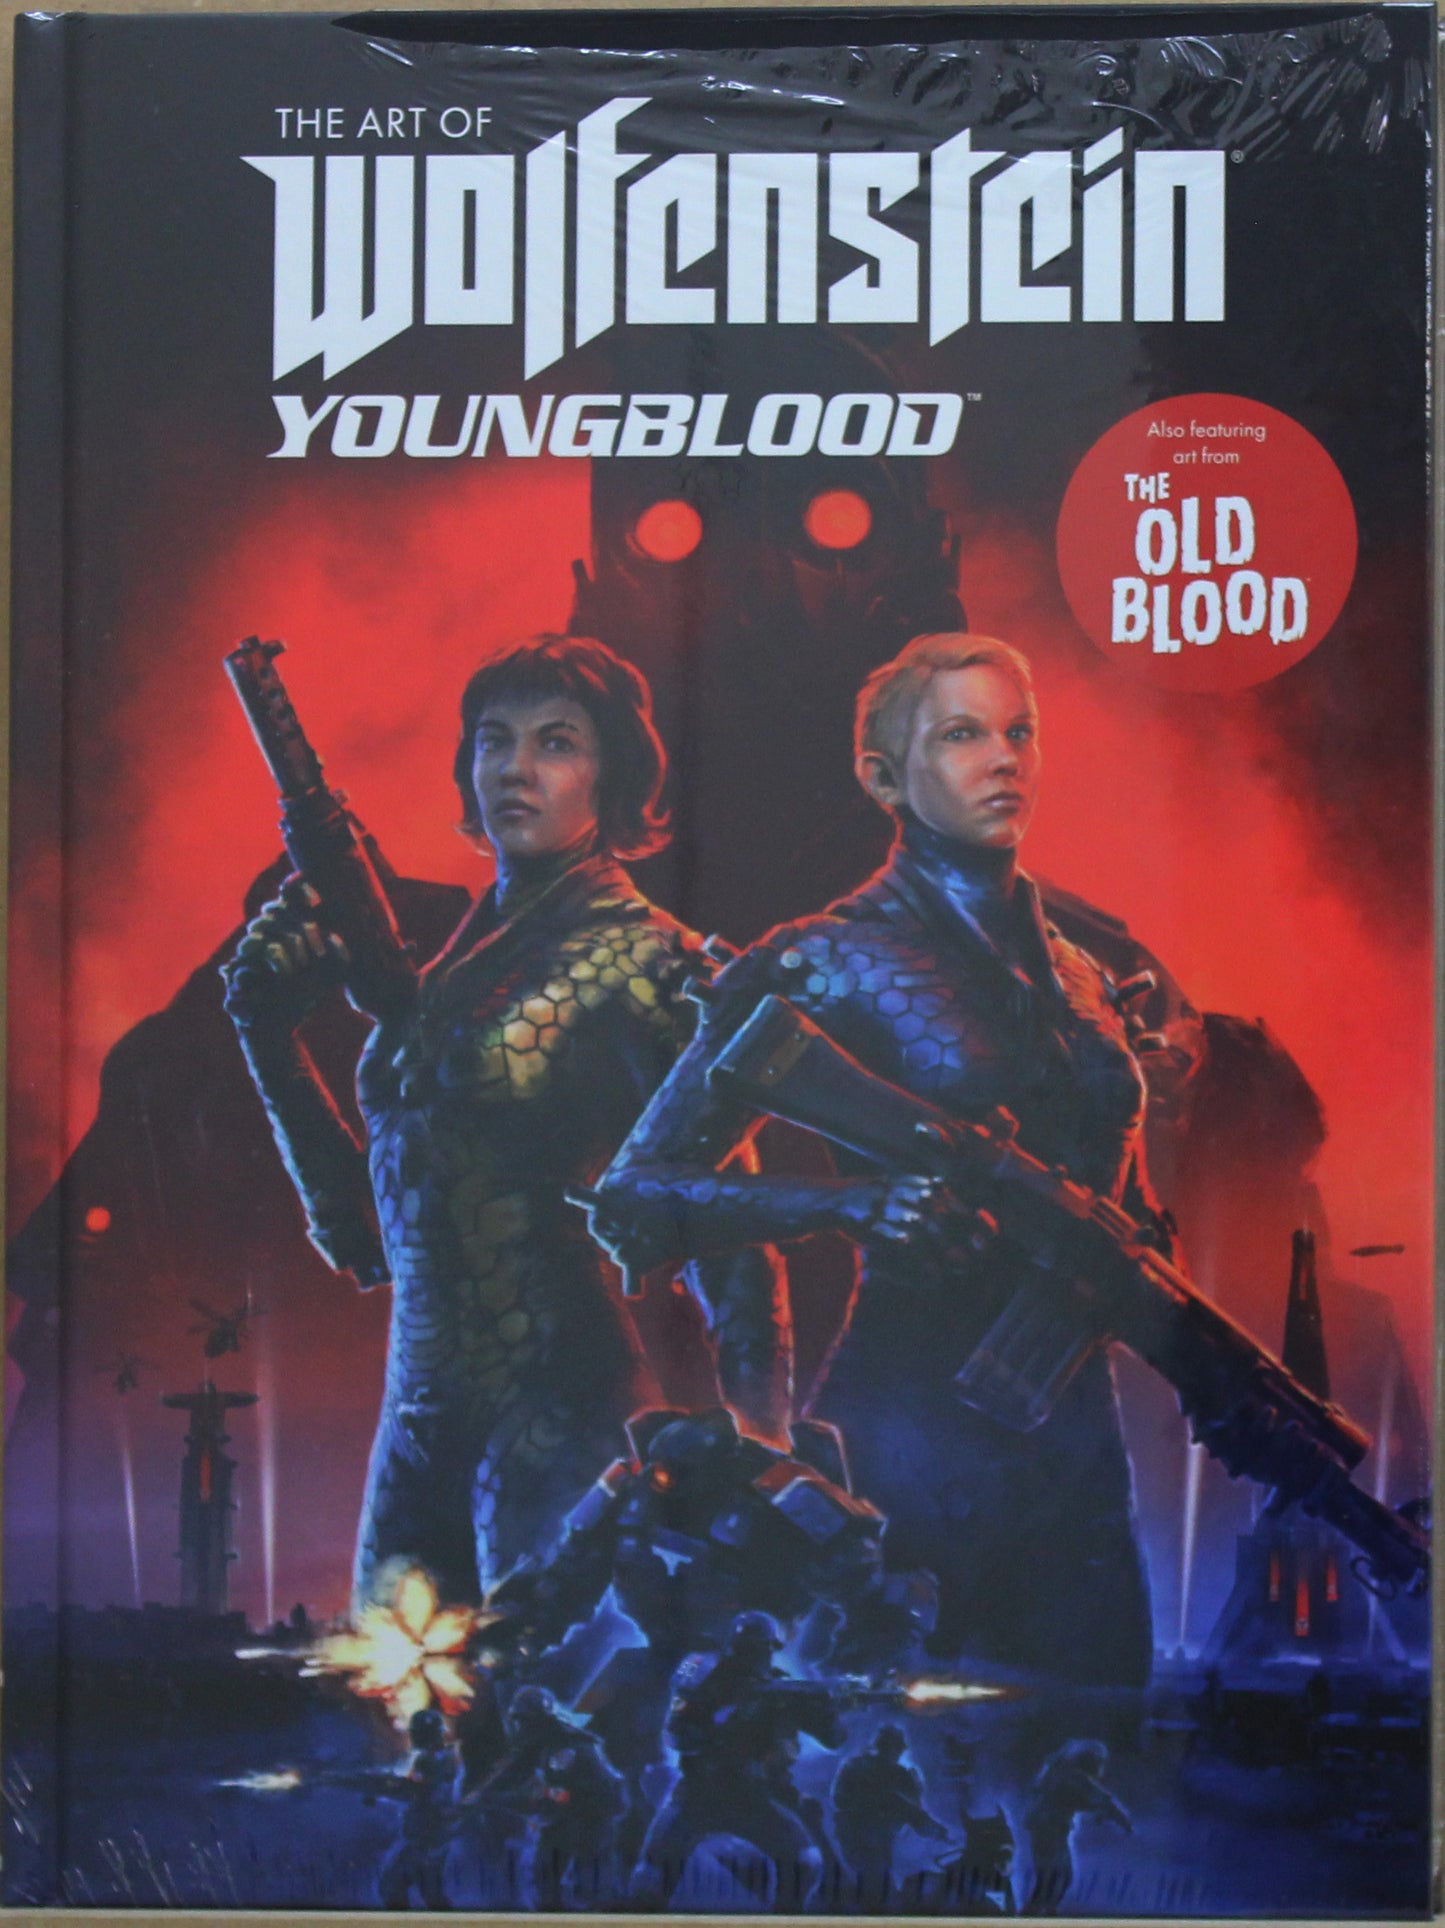 The Art of Wolfenstein Youngblood